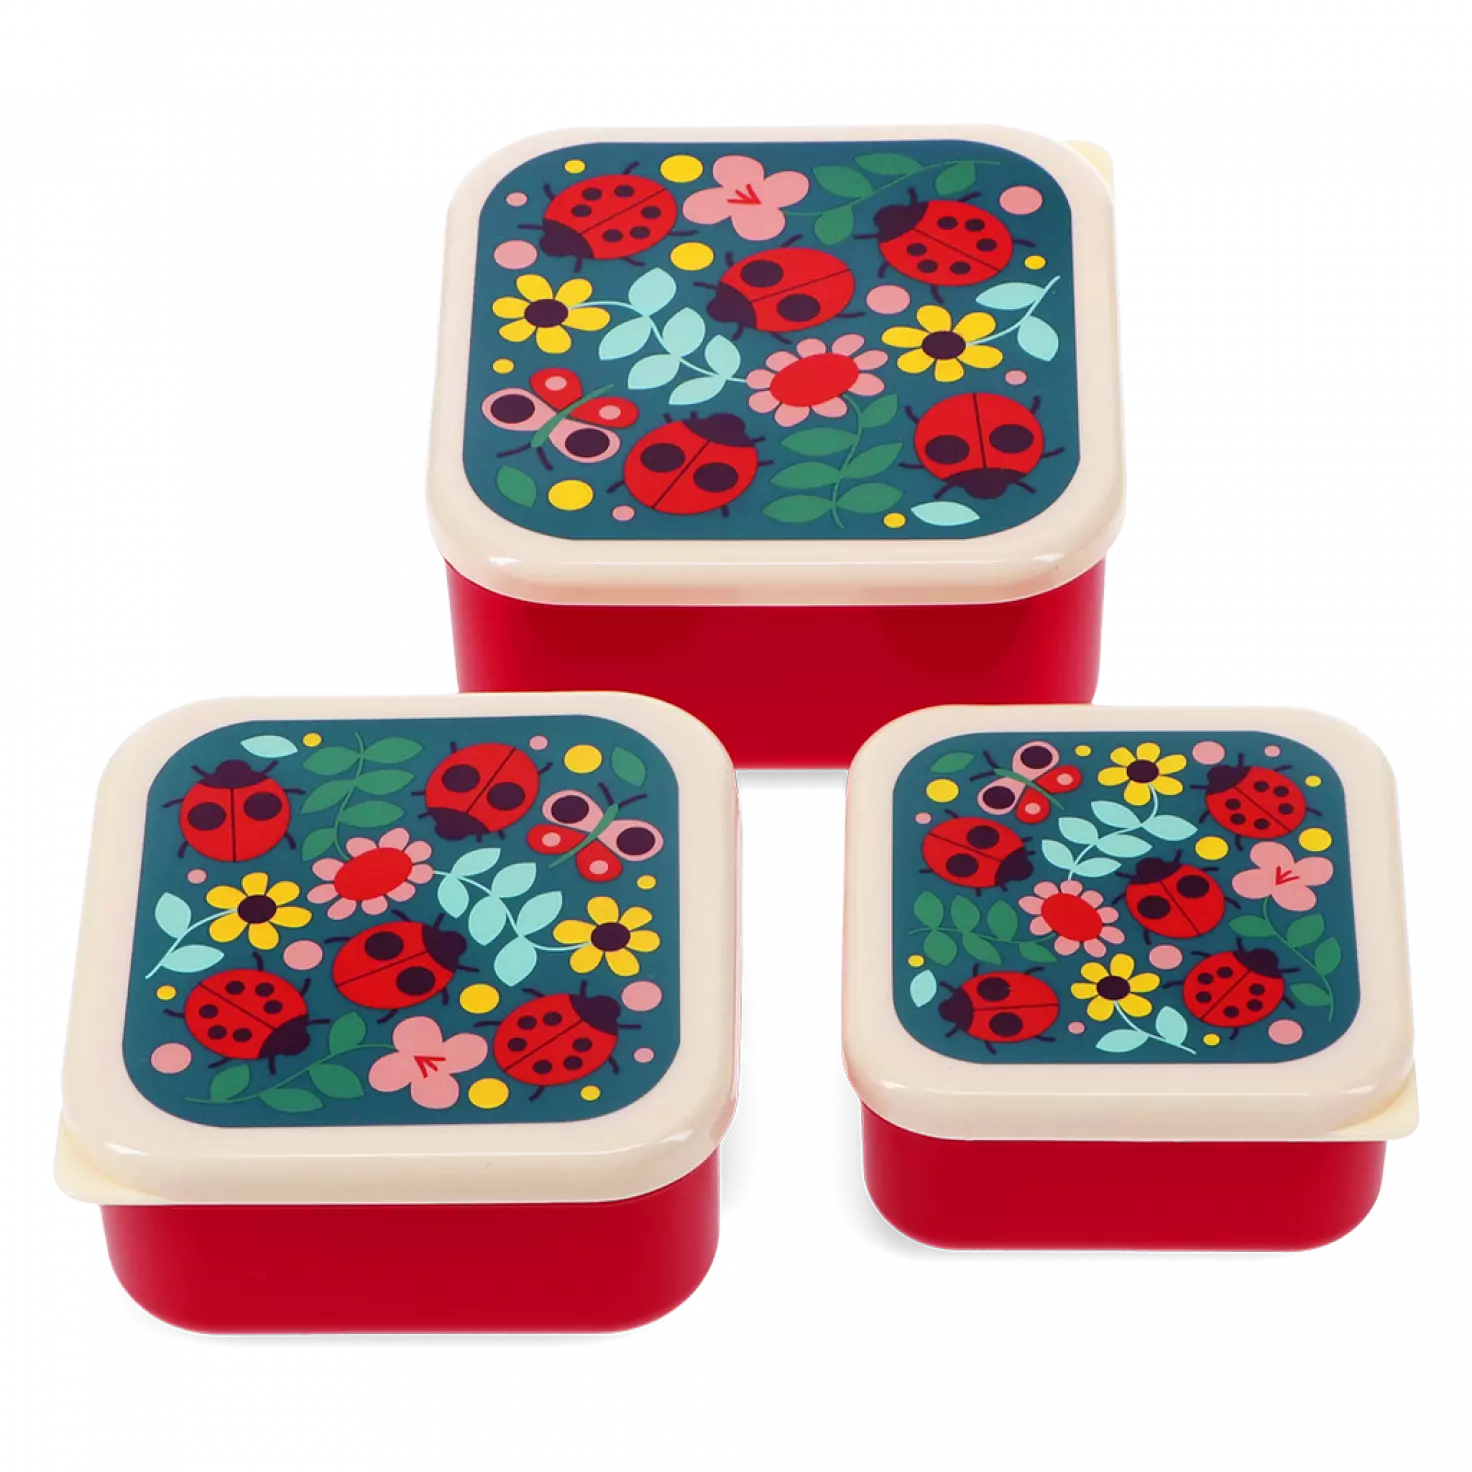 Snack boxes (set of 3) - Ladybird